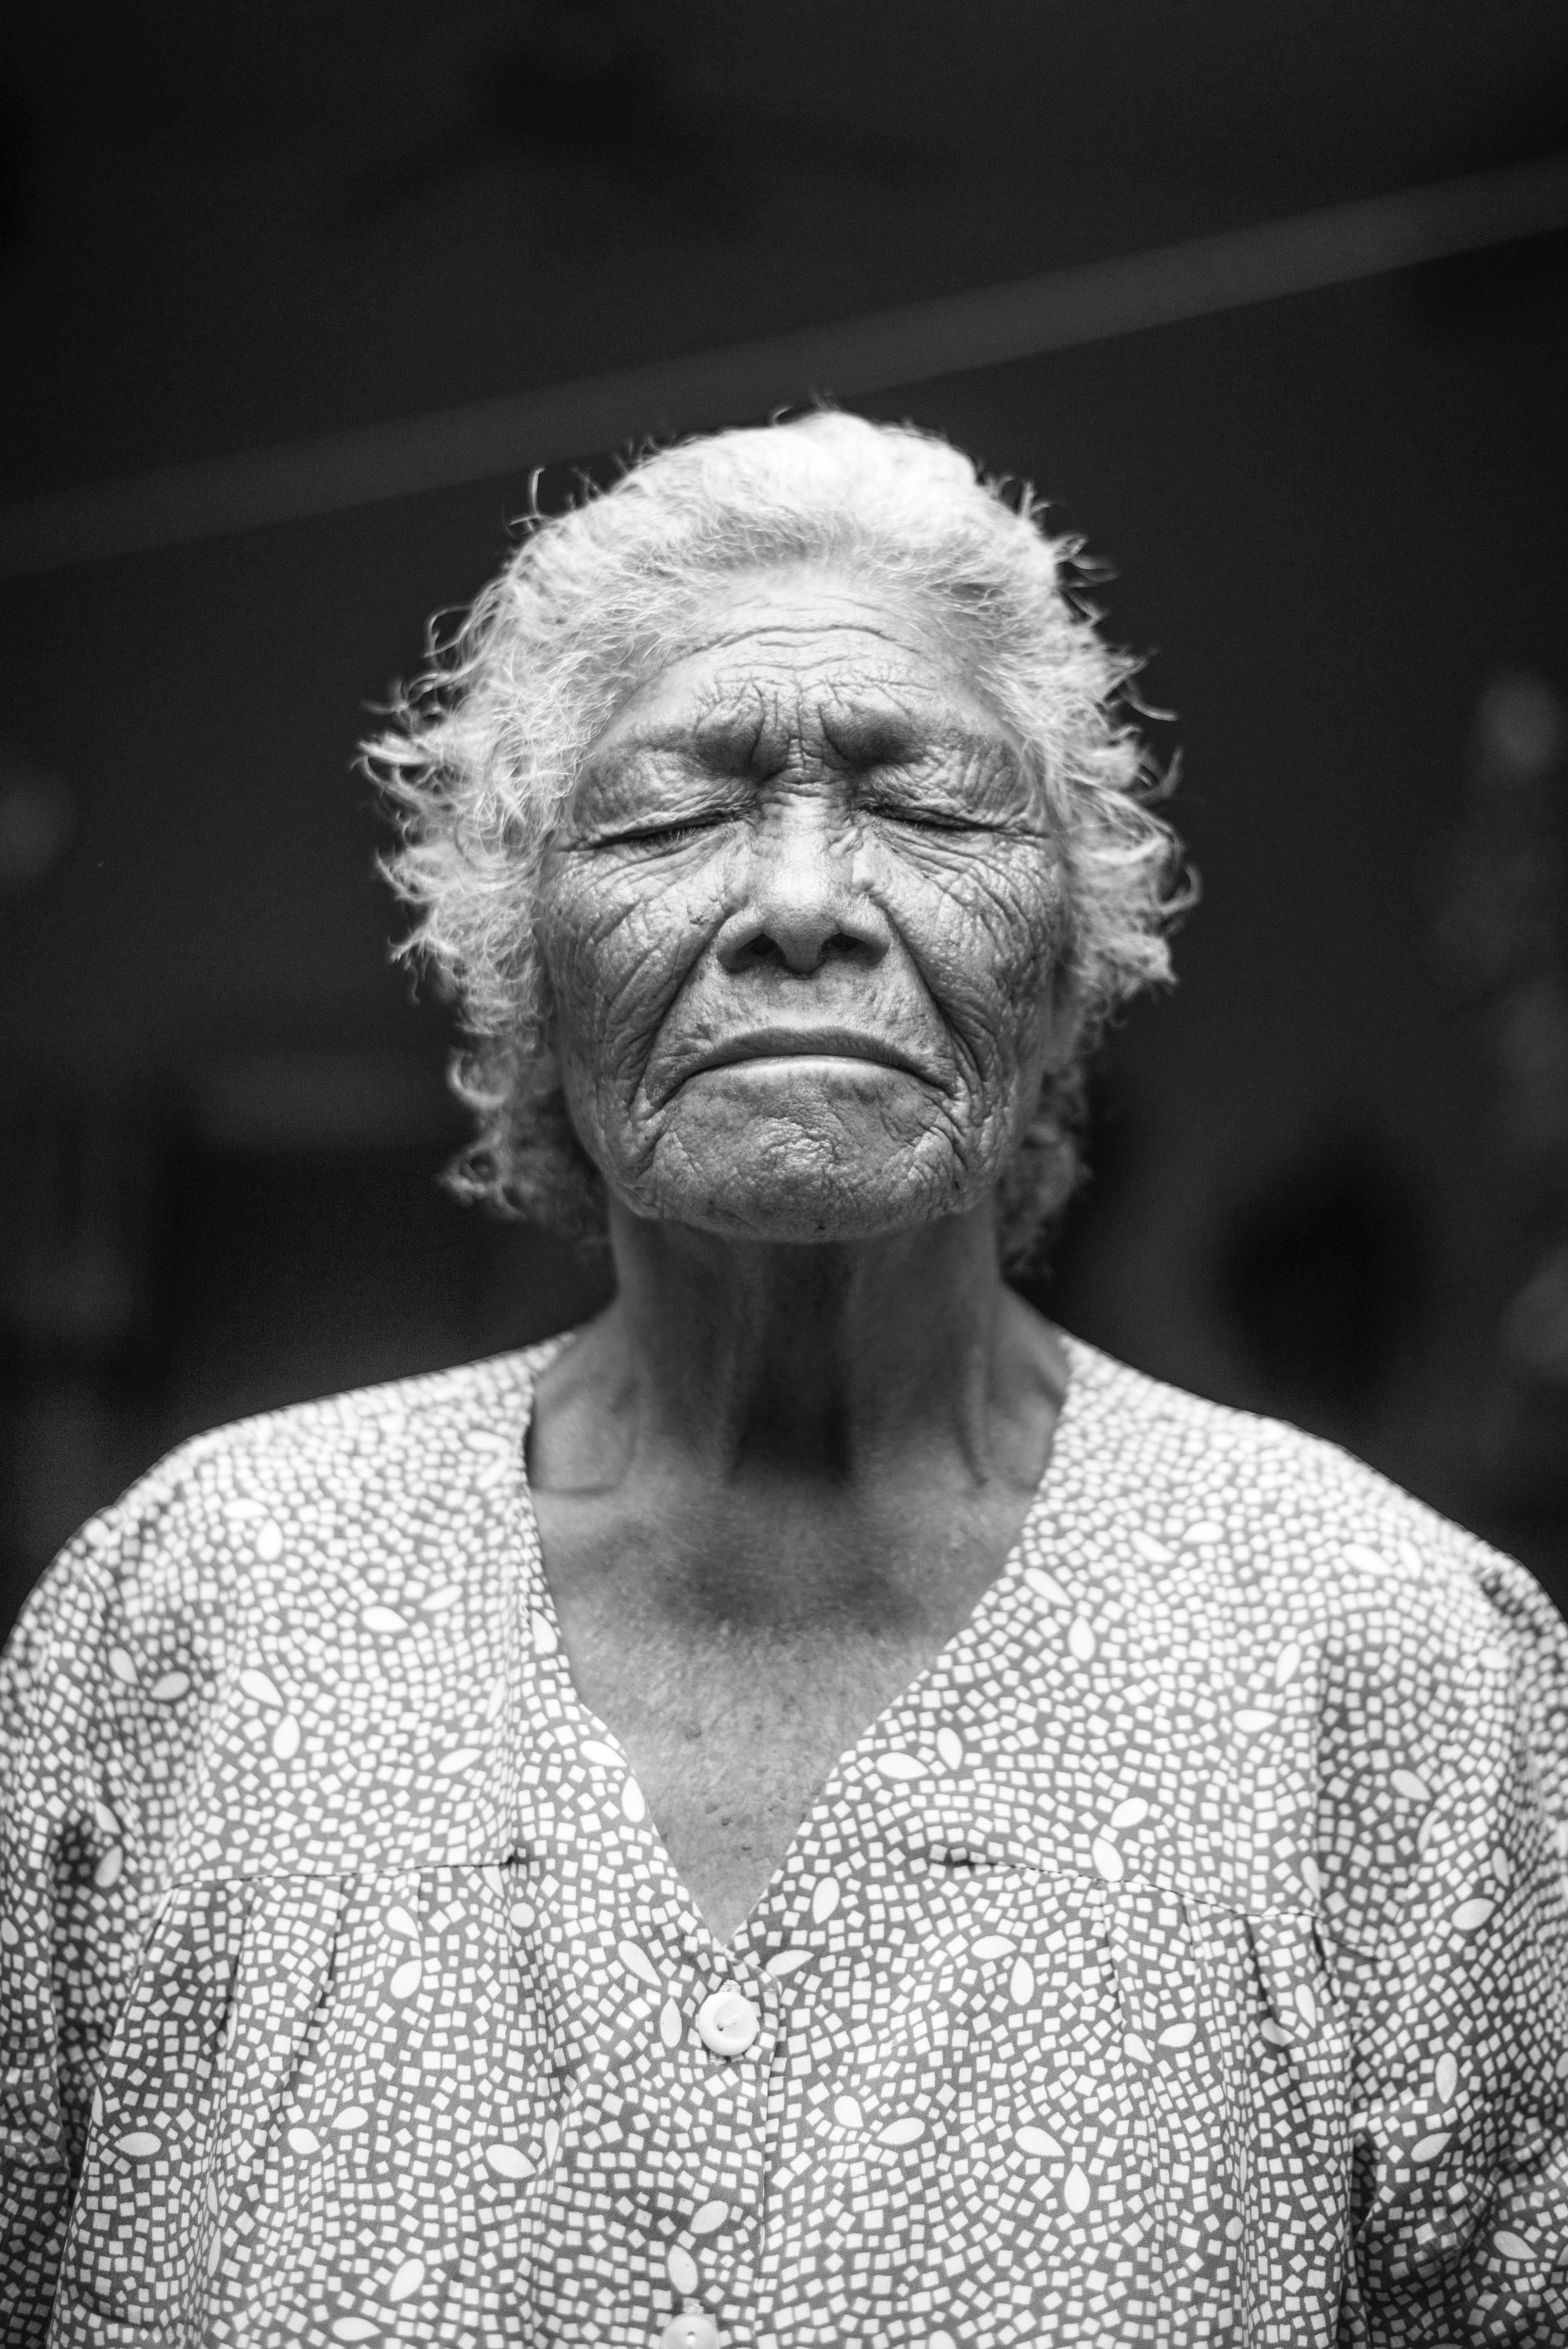 Wallpaper / old grandmother with gray hair and a wrinkled face closing her eyes in black and white, _old woman closing her eyes 4k wallpaper